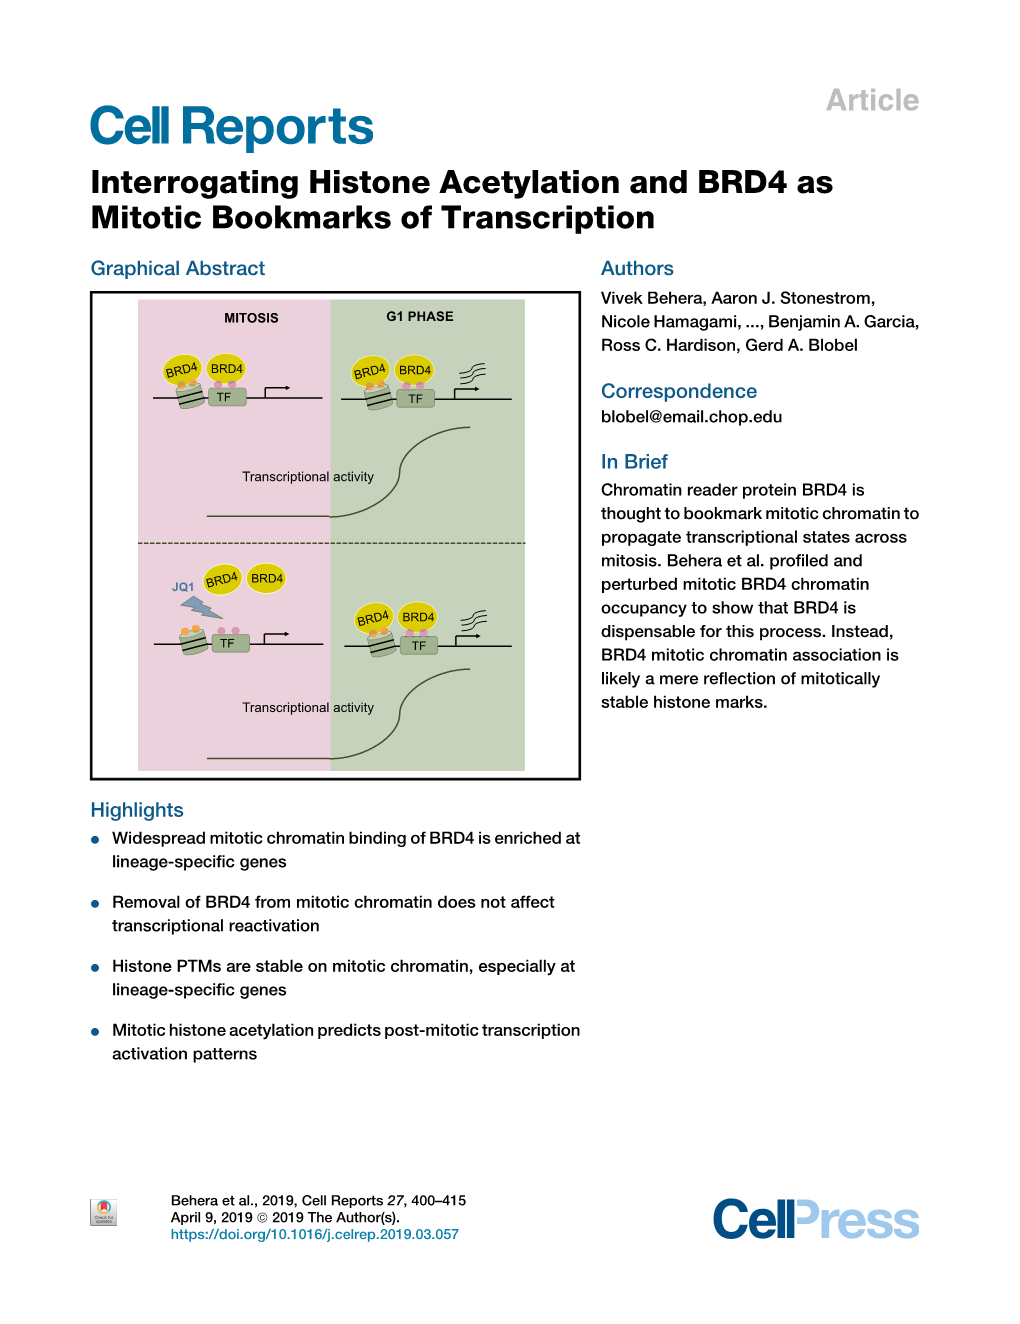 Interrogating Histone Acetylation and BRD4 As Mitotic Bookmarks of Transcription